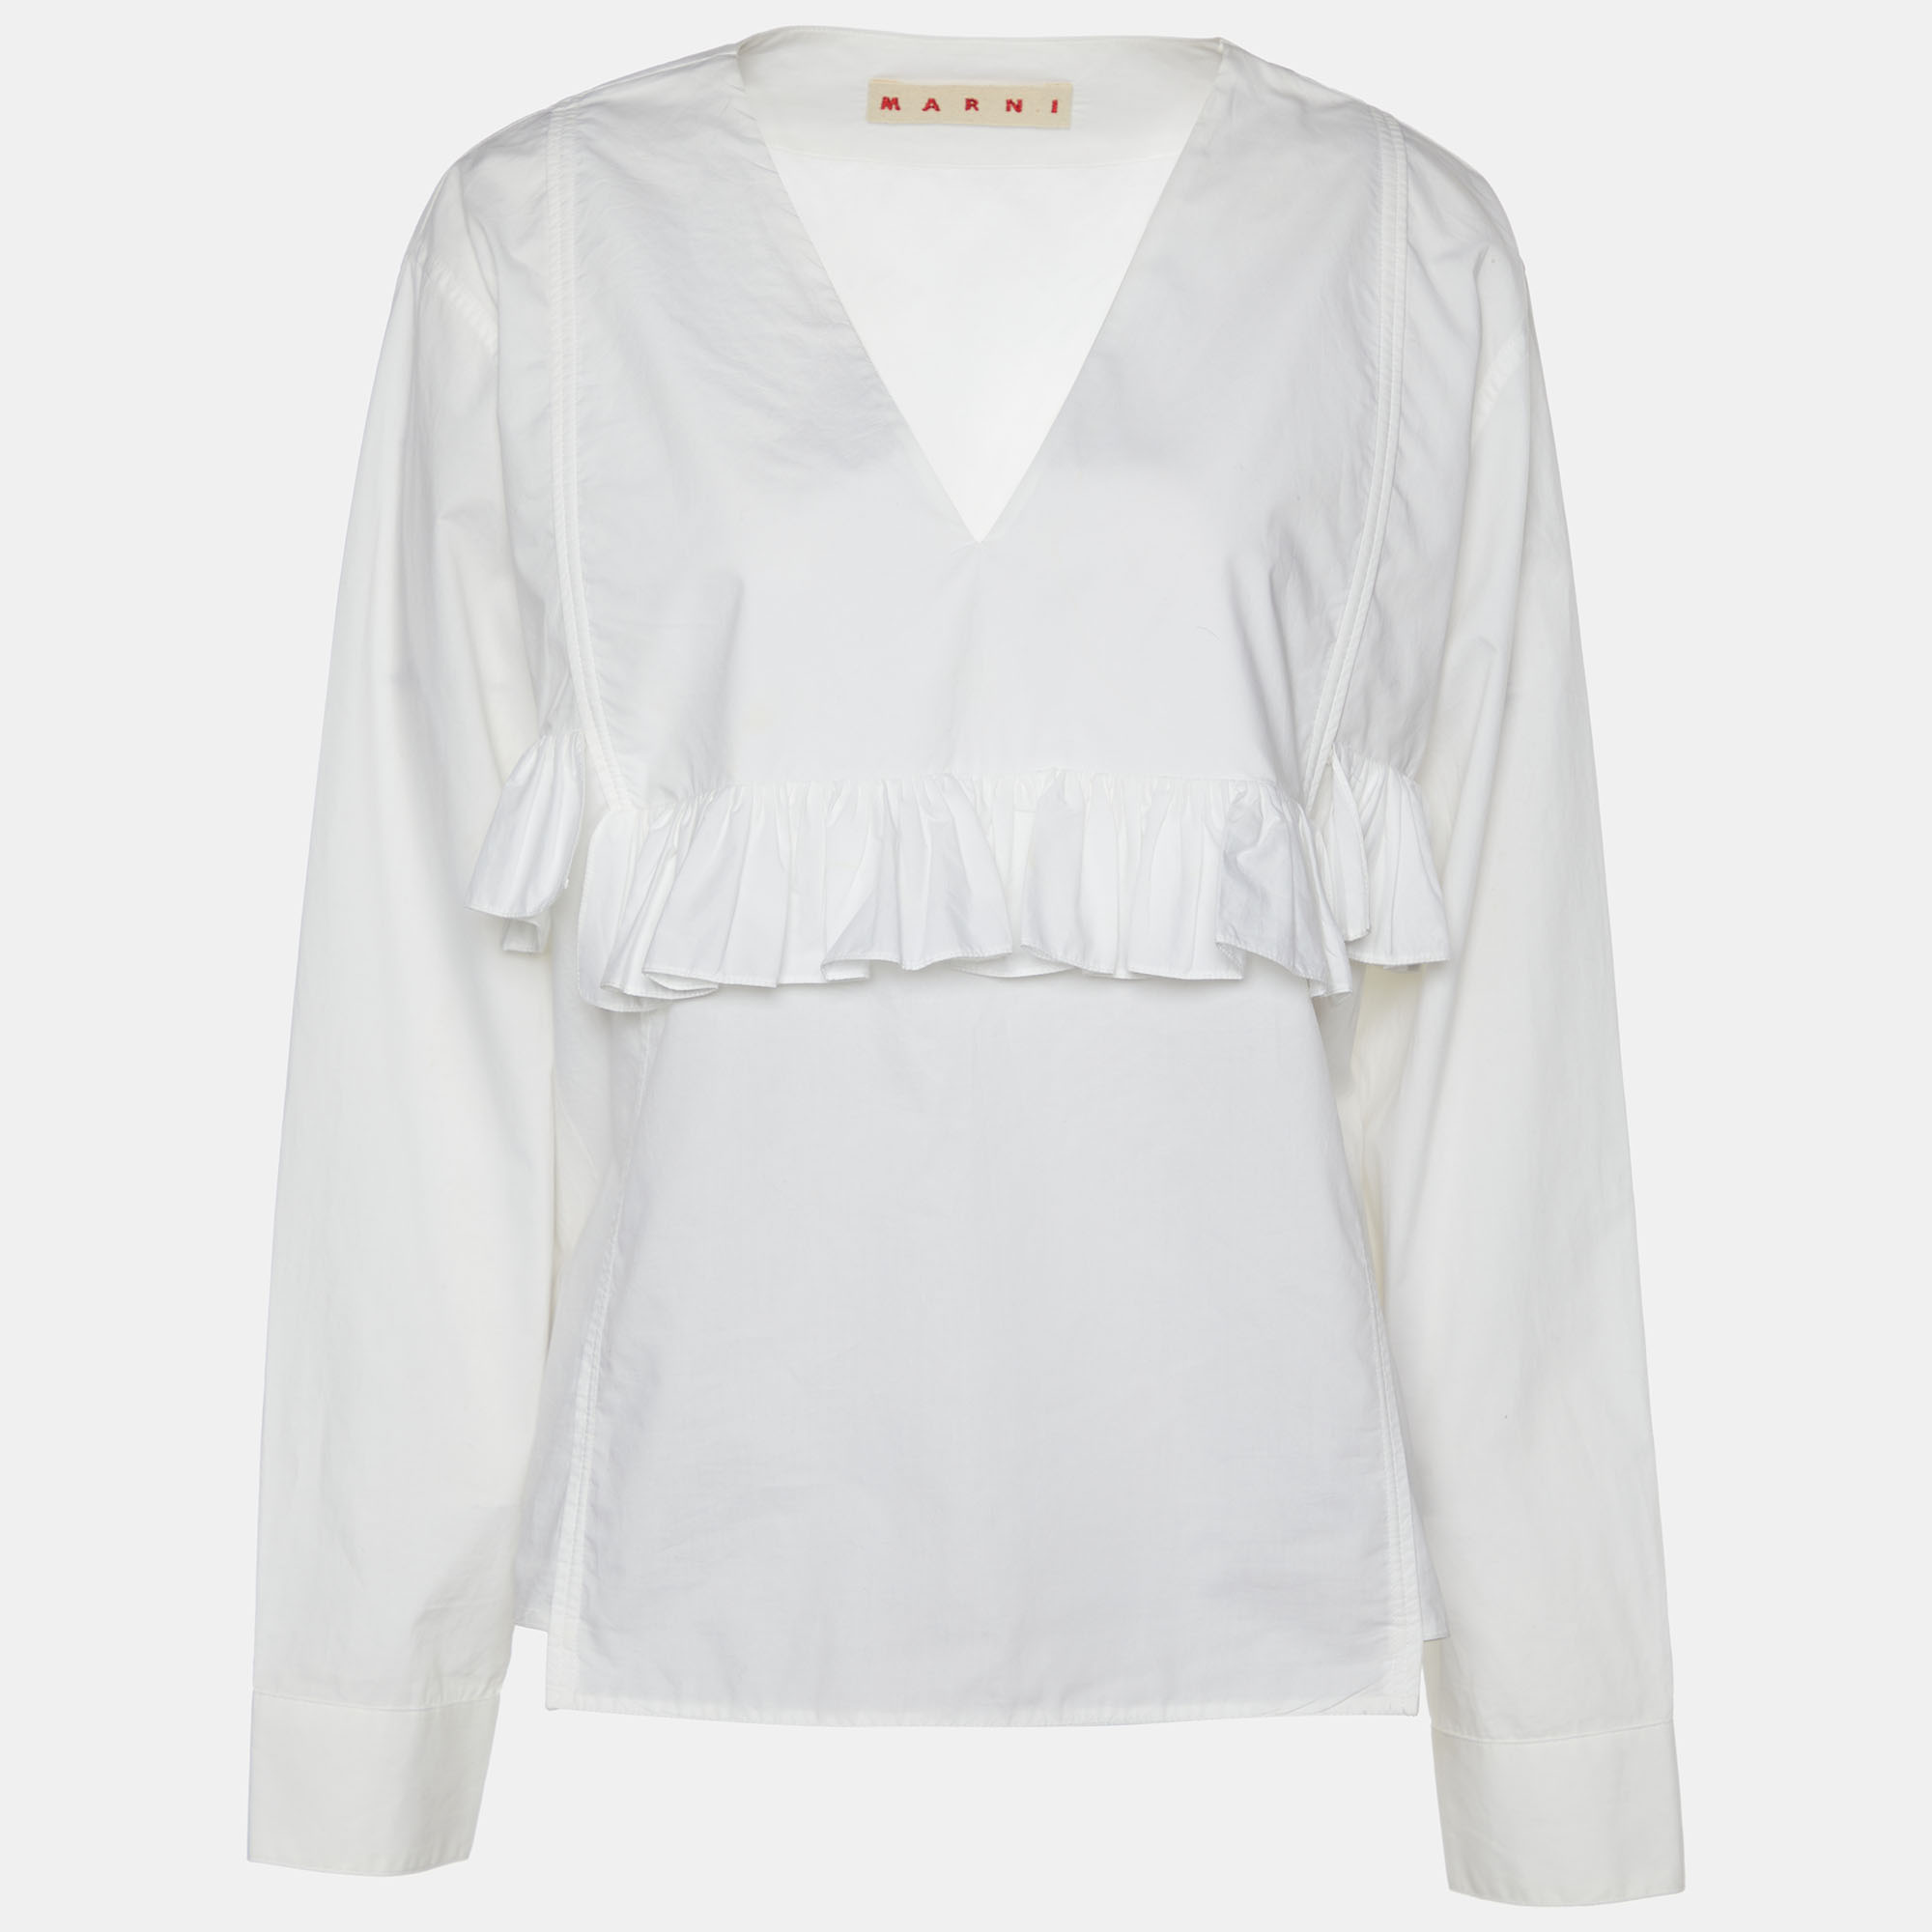 Pre-owned Marni White Cotton Ruffle Detail V-neck Top L